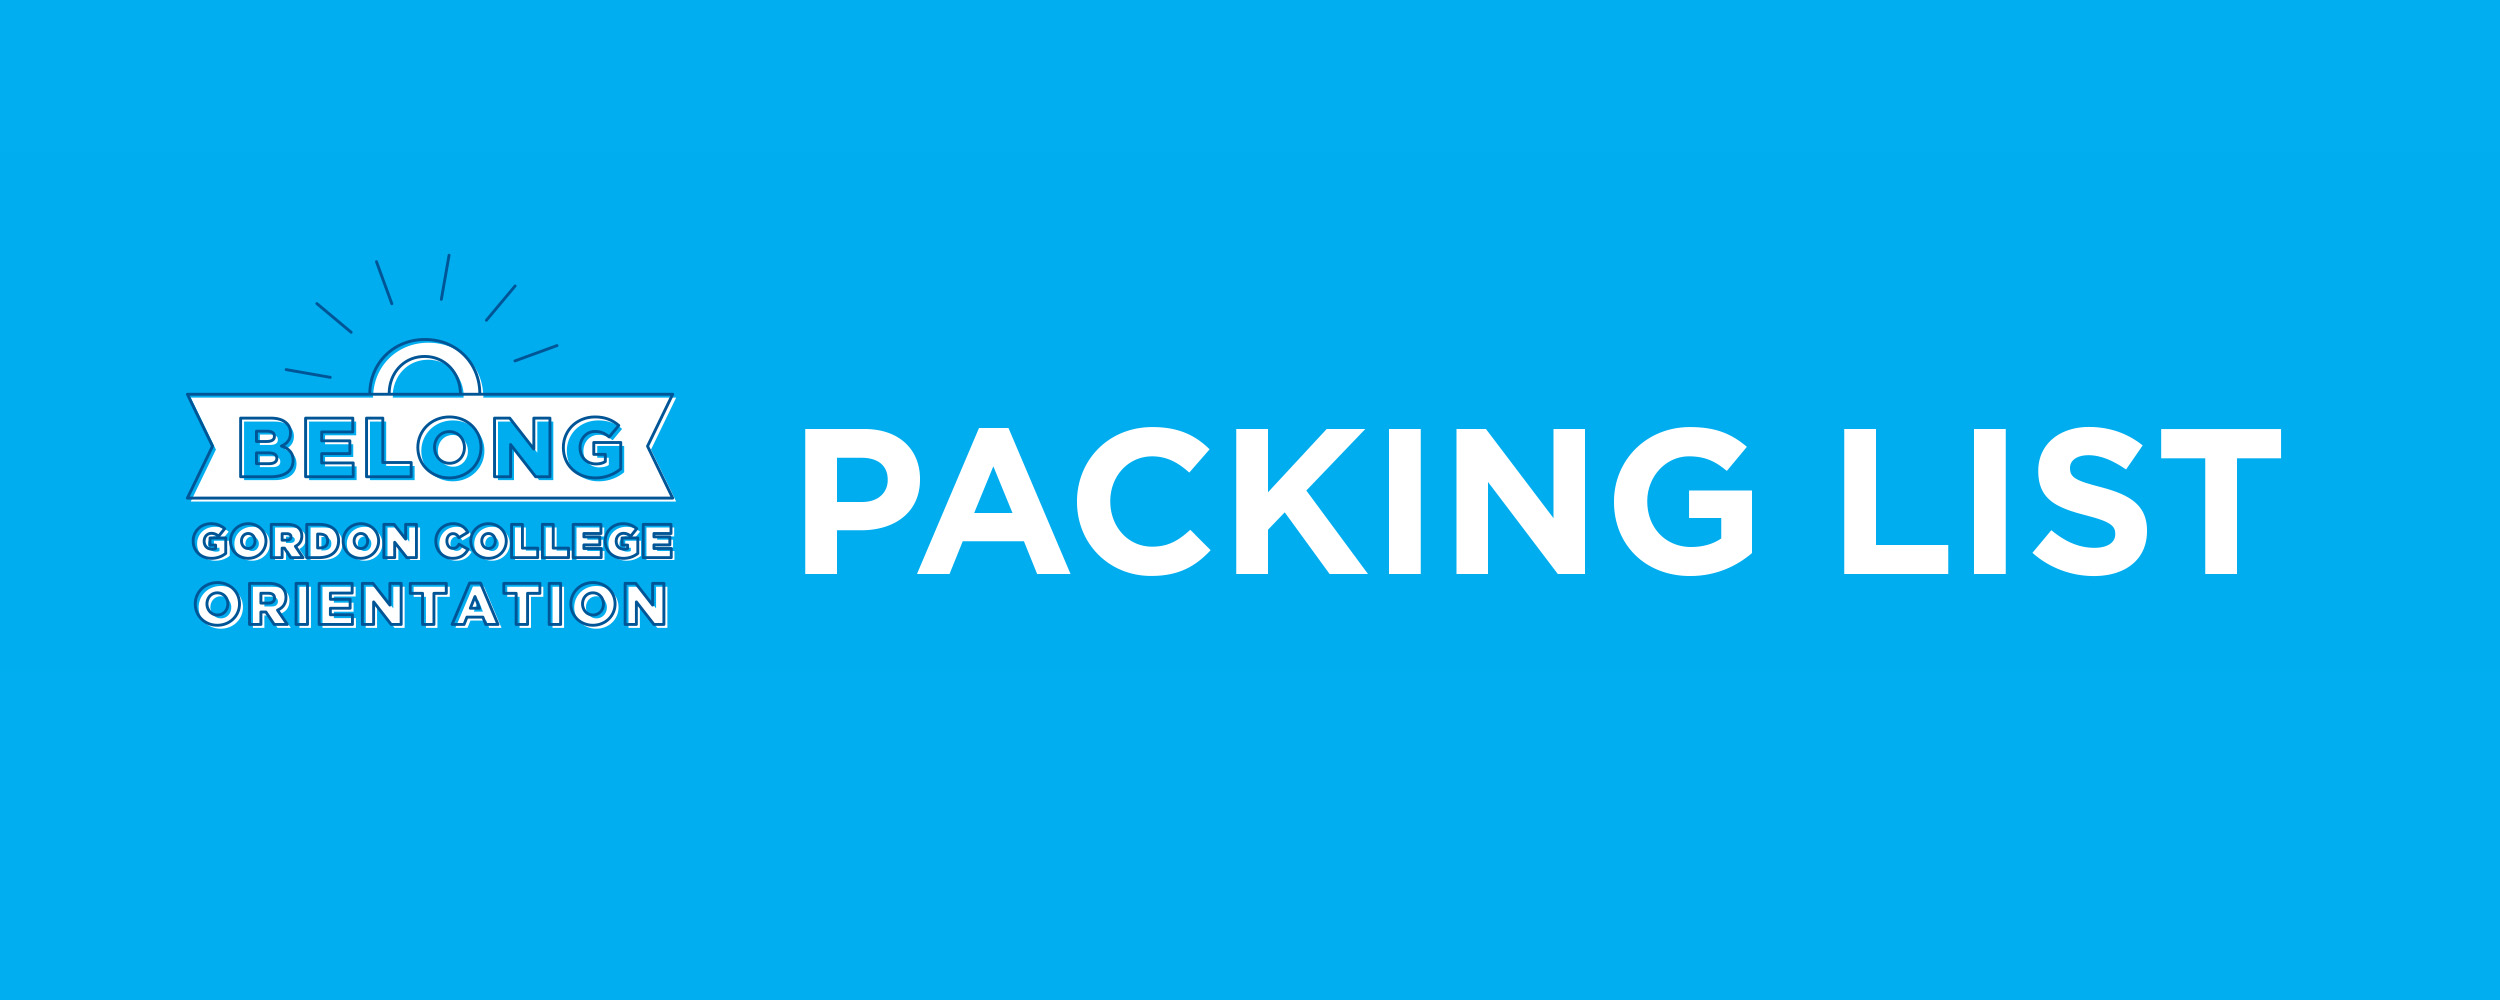 Packing List Graphic 